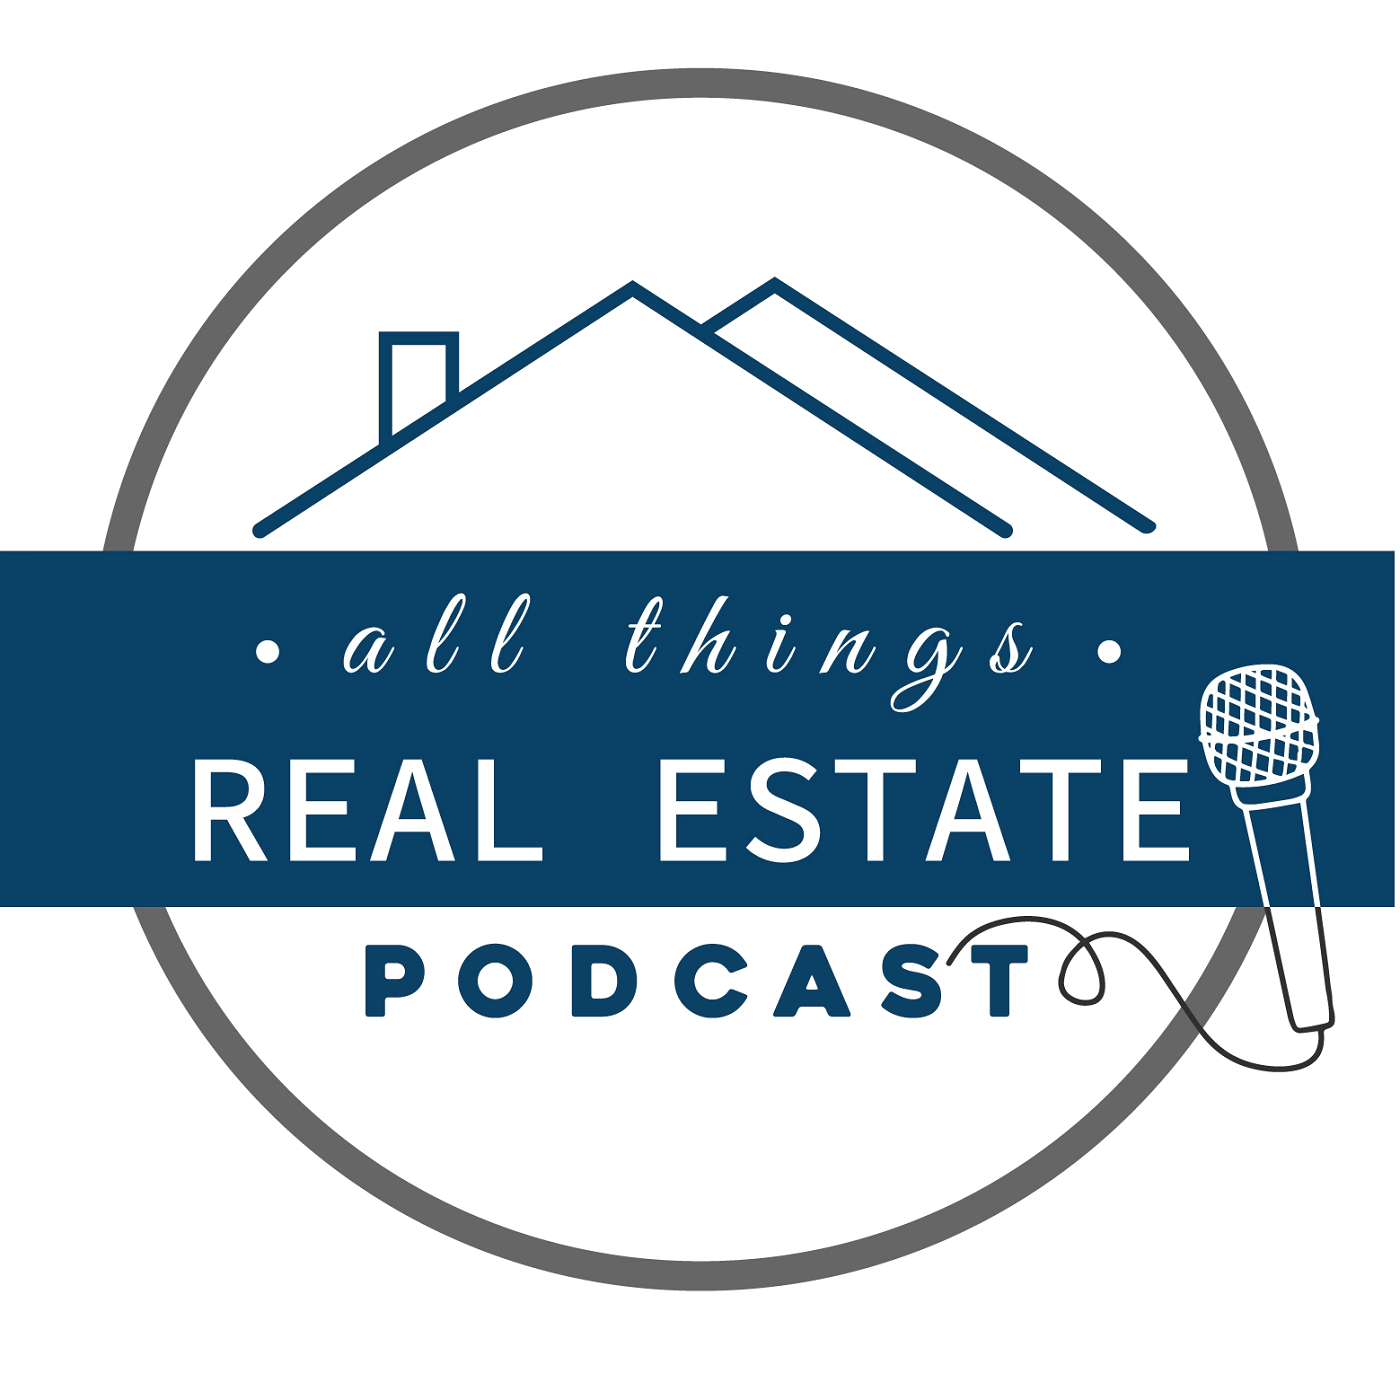 All Things Real Estate Podcast